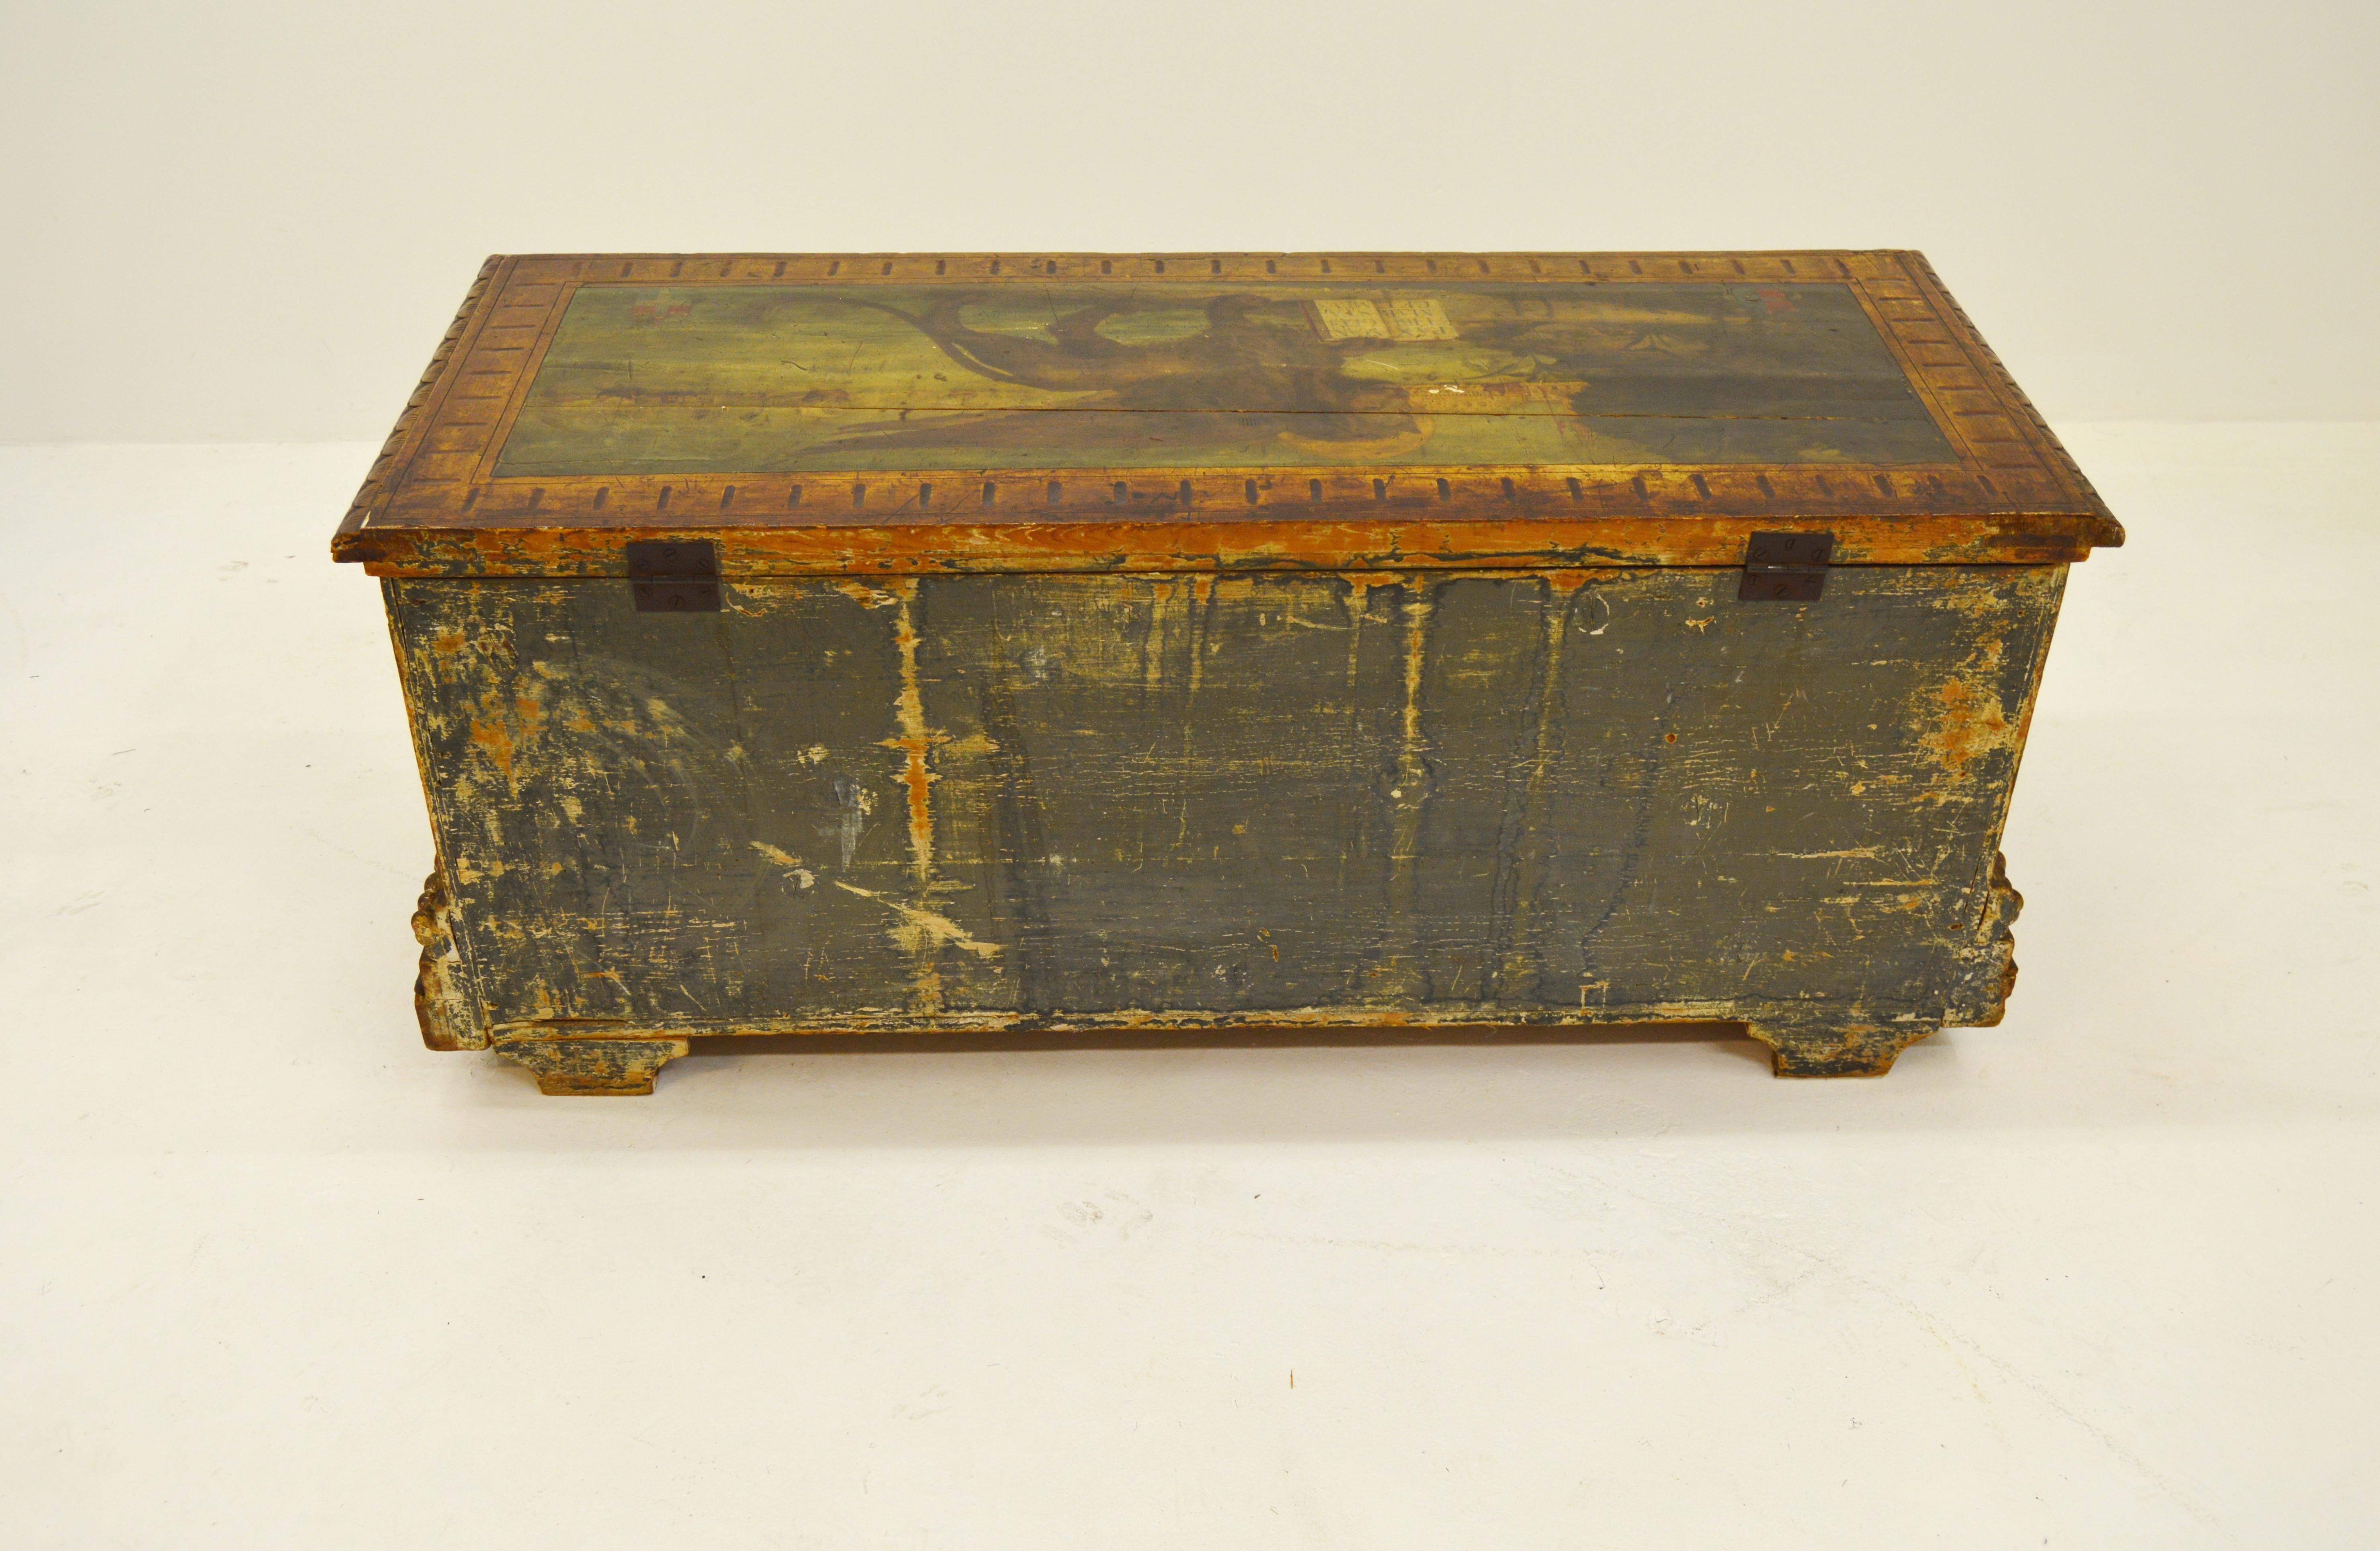 Italian Renaissance Style Carved and painted Florentine Cassone Floor Trunk In Good Condition For Sale In Alvesta, SE